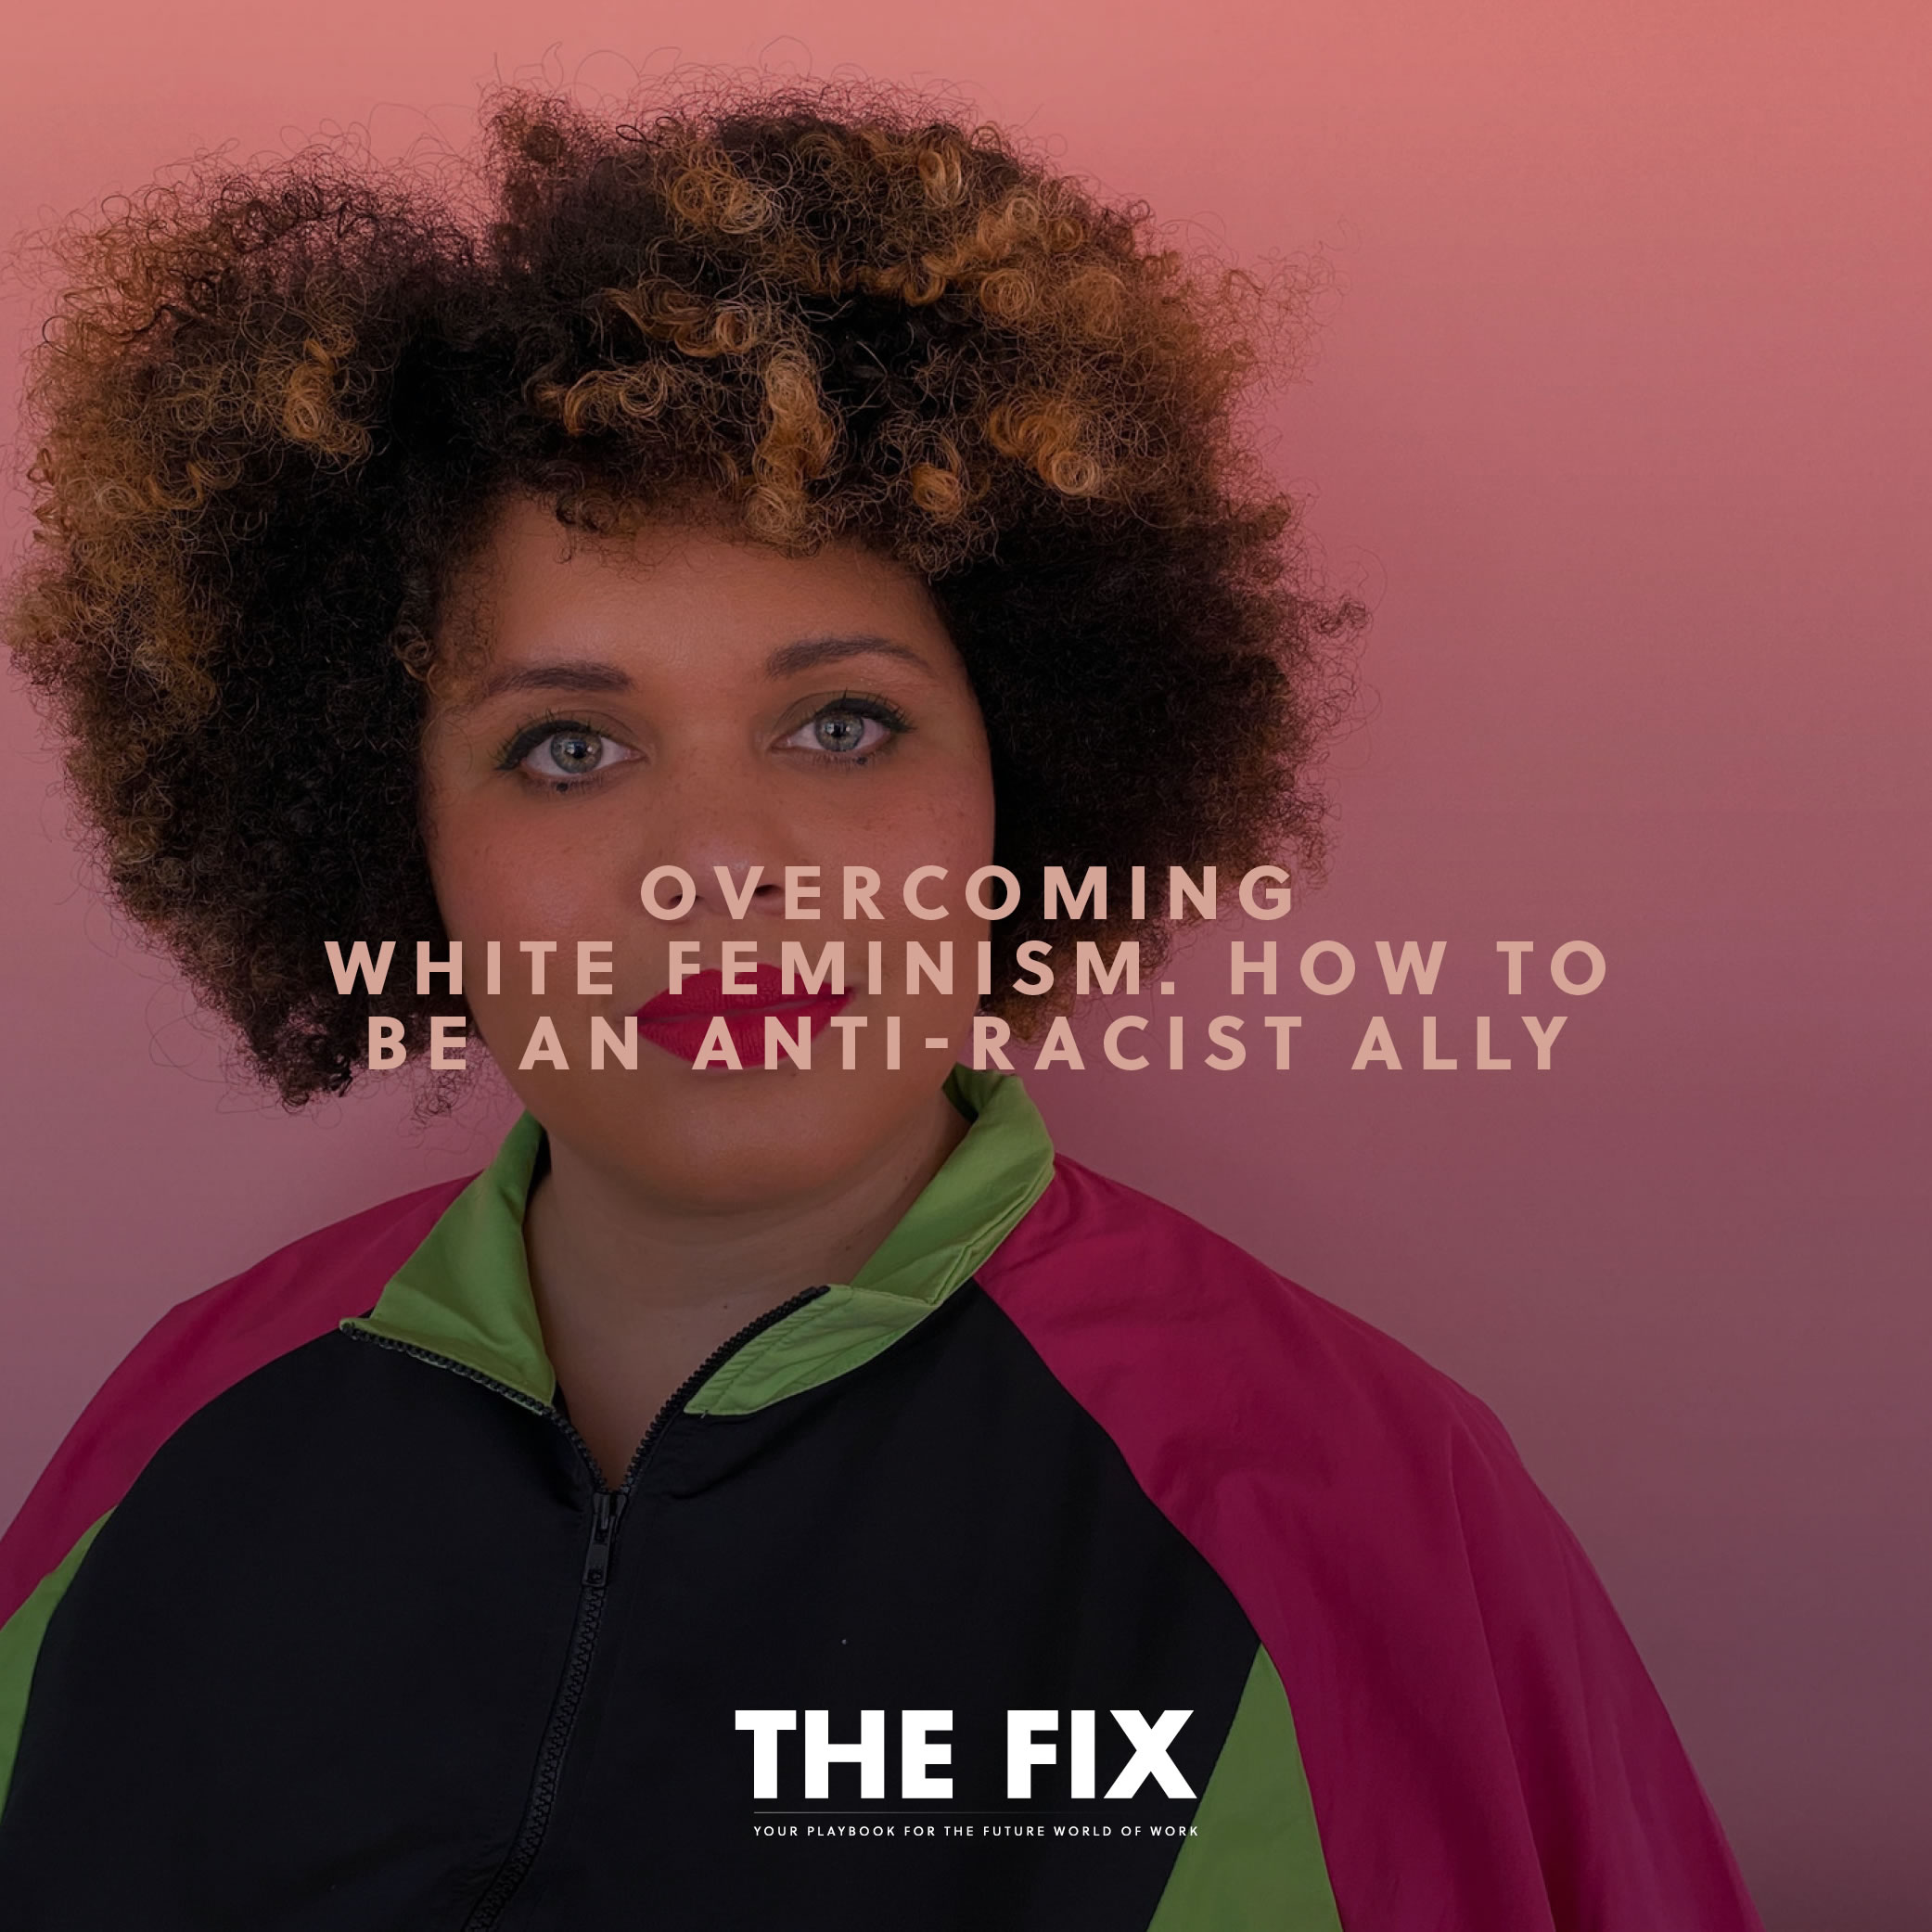 Overcoming White Feminism. How To Be an Anti-Racist Ally